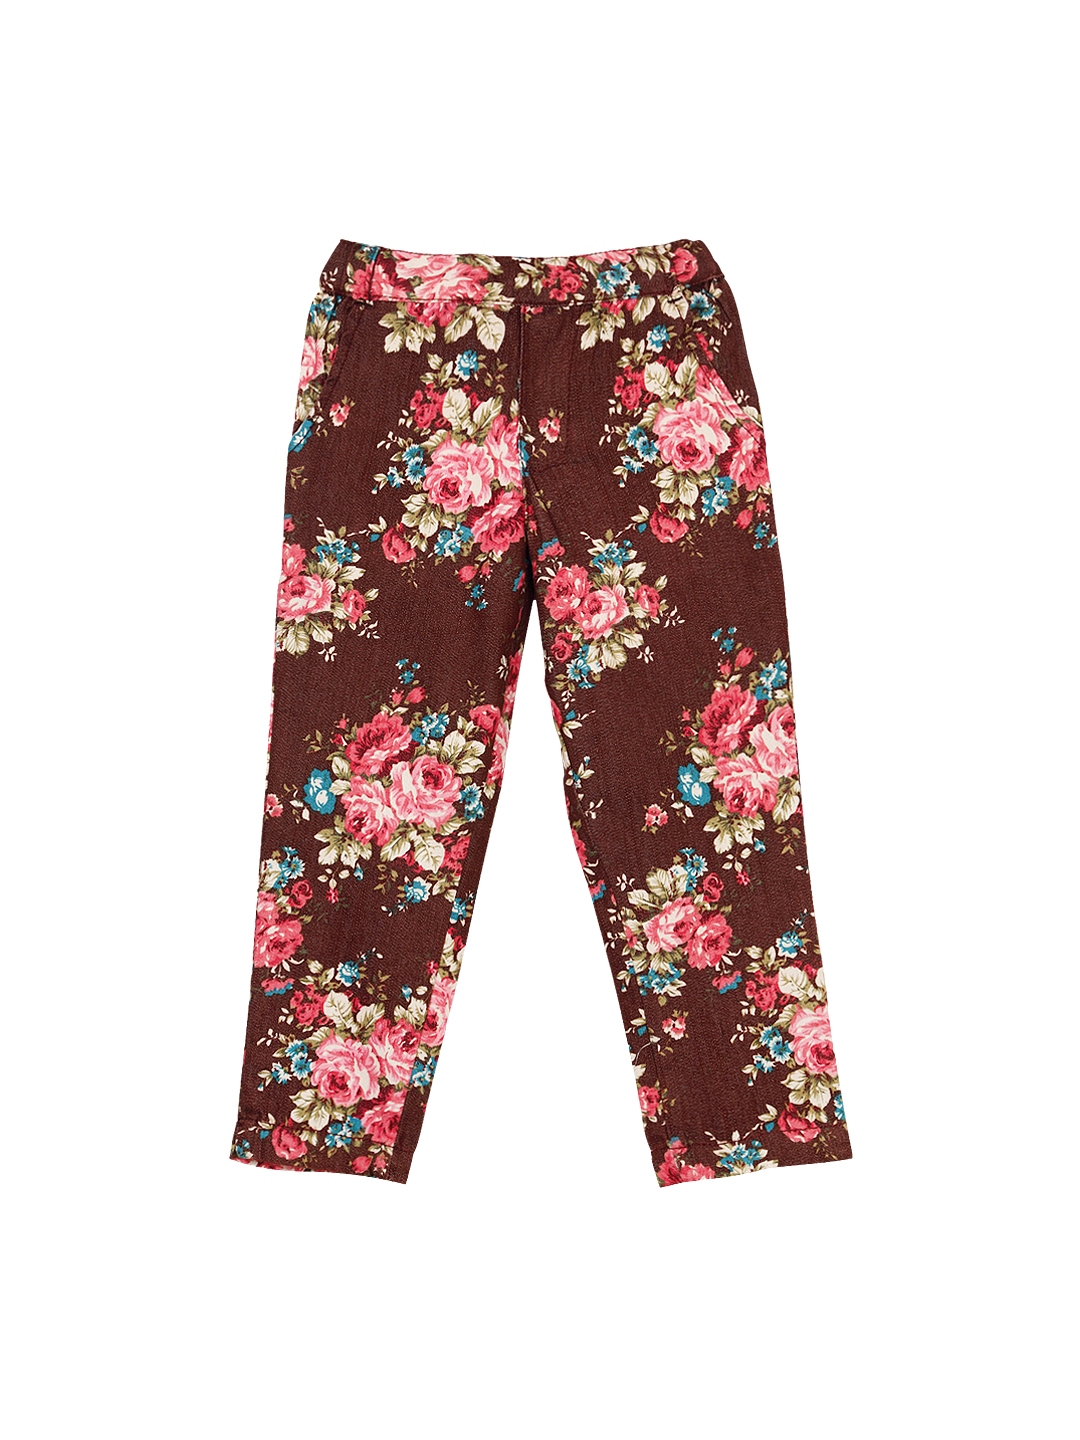 Buy Oye Girls Brown Printed Trousers - Trousers for Girls 732509 | Myntra